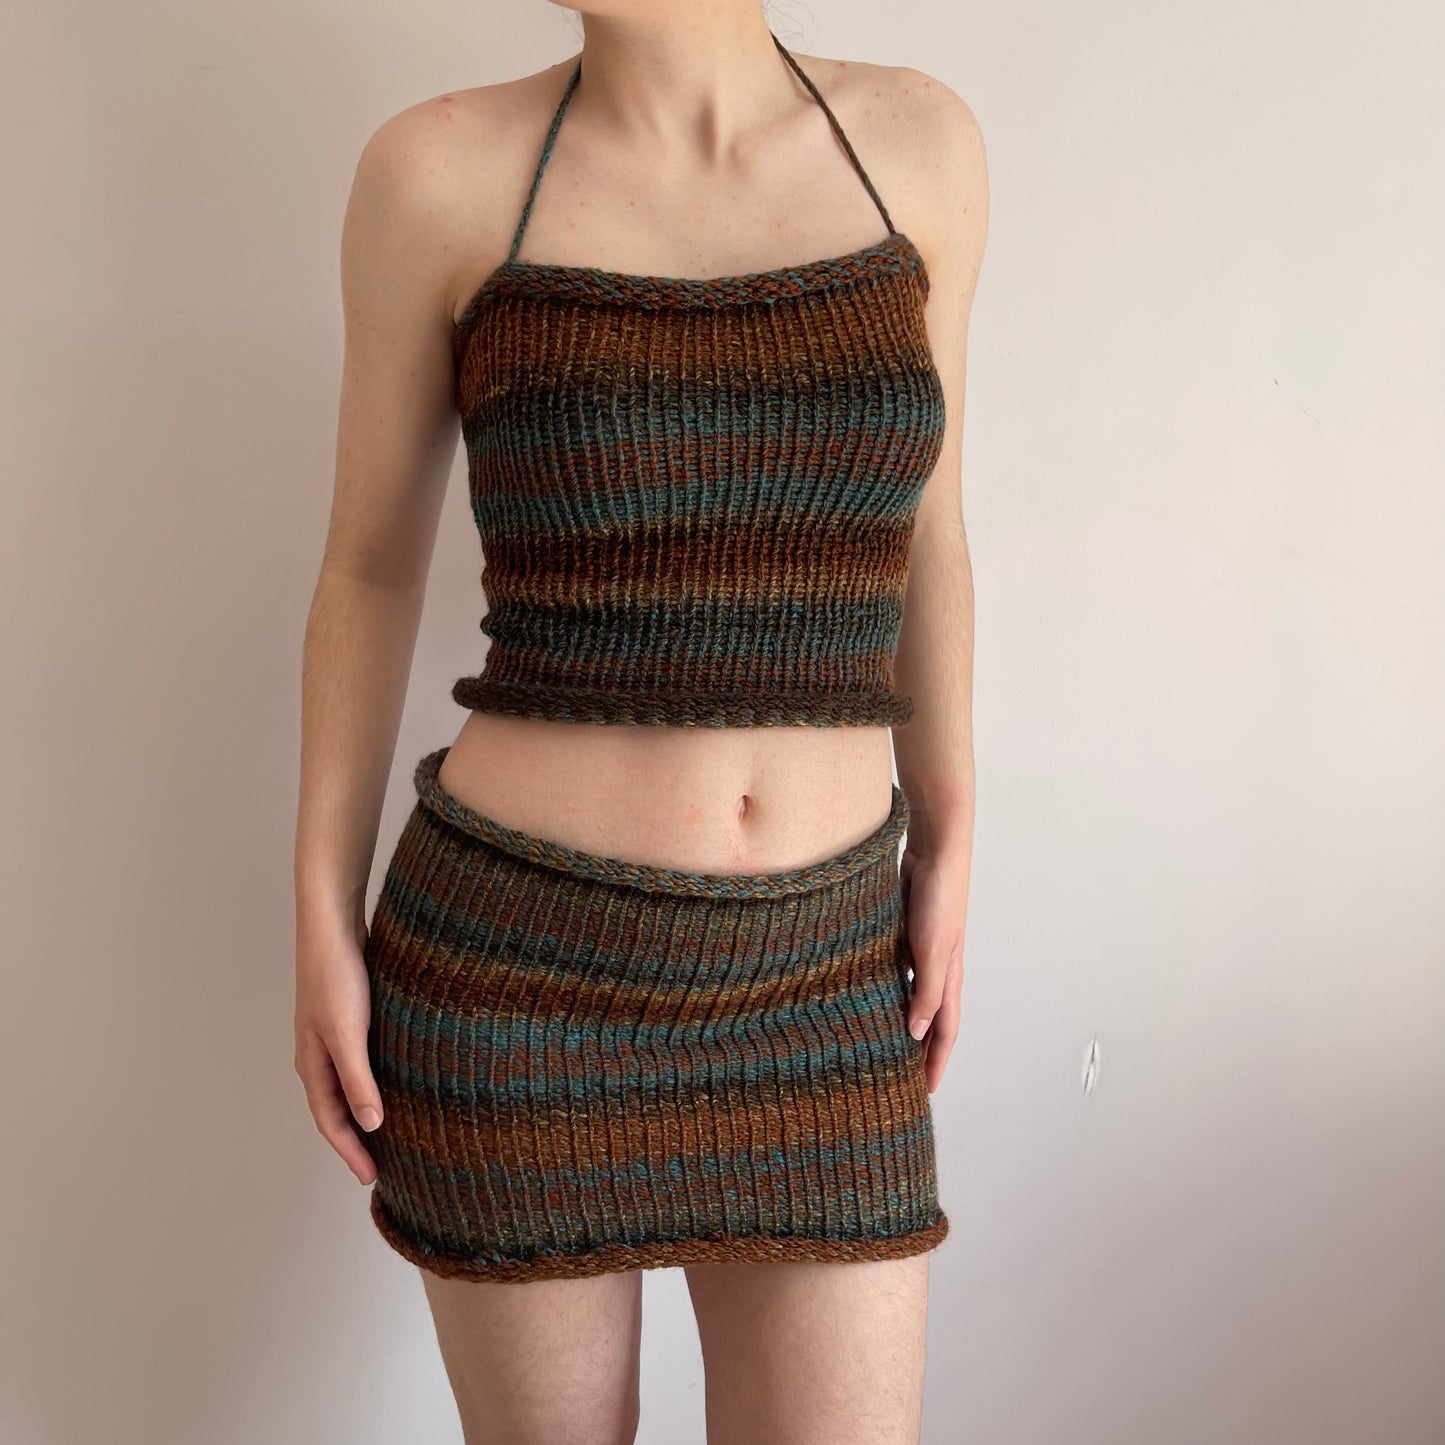 Handmade knitted halter top in brown and blue shades